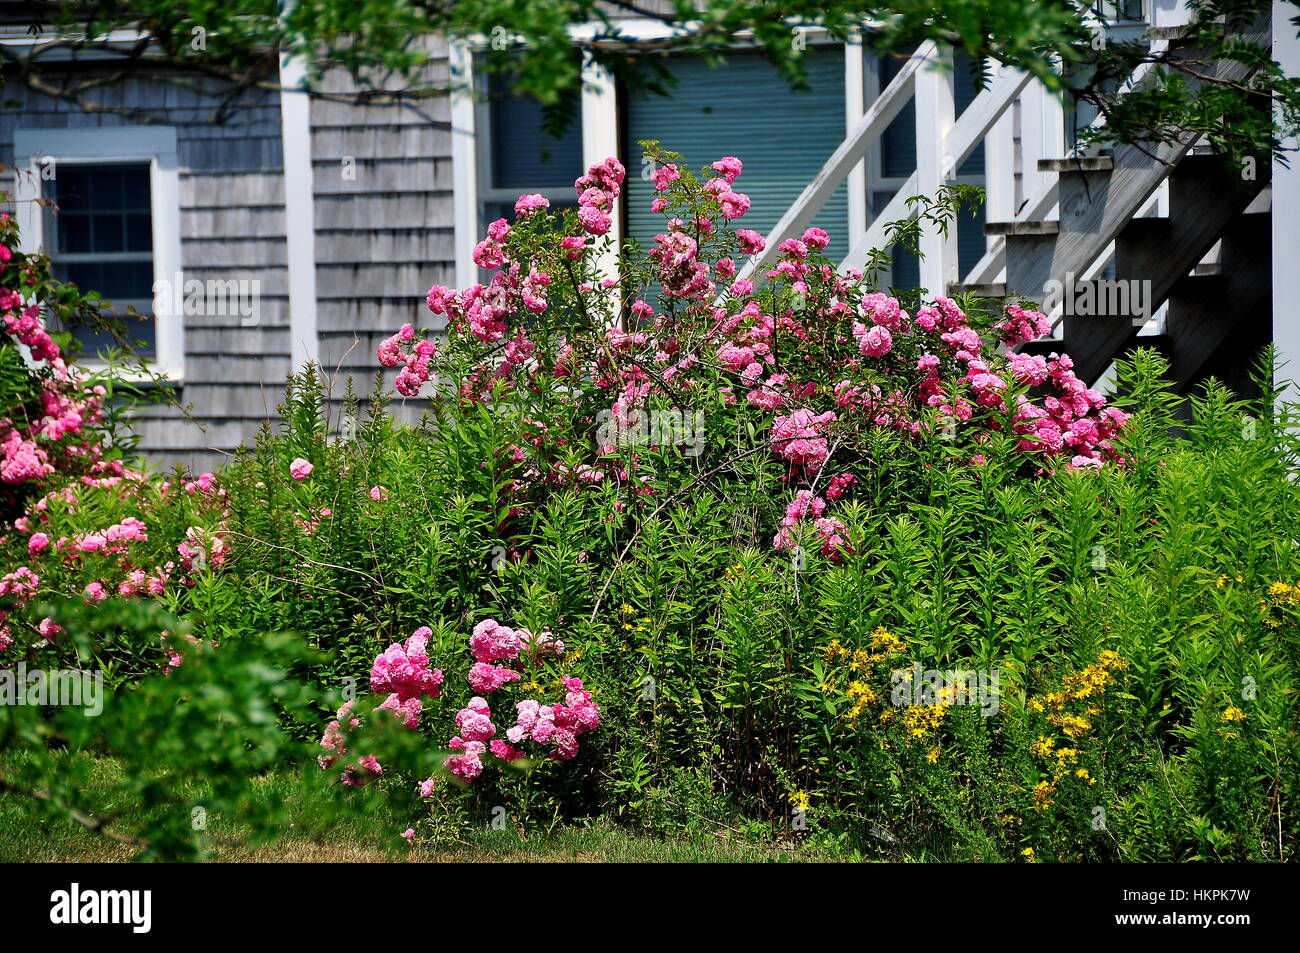 Chtham, Massachusetts - July 15, 2015:  Mounds of wild pink roses spill over a fence next to a Cape Cod home near 1879 Chatham Light Stock Photo